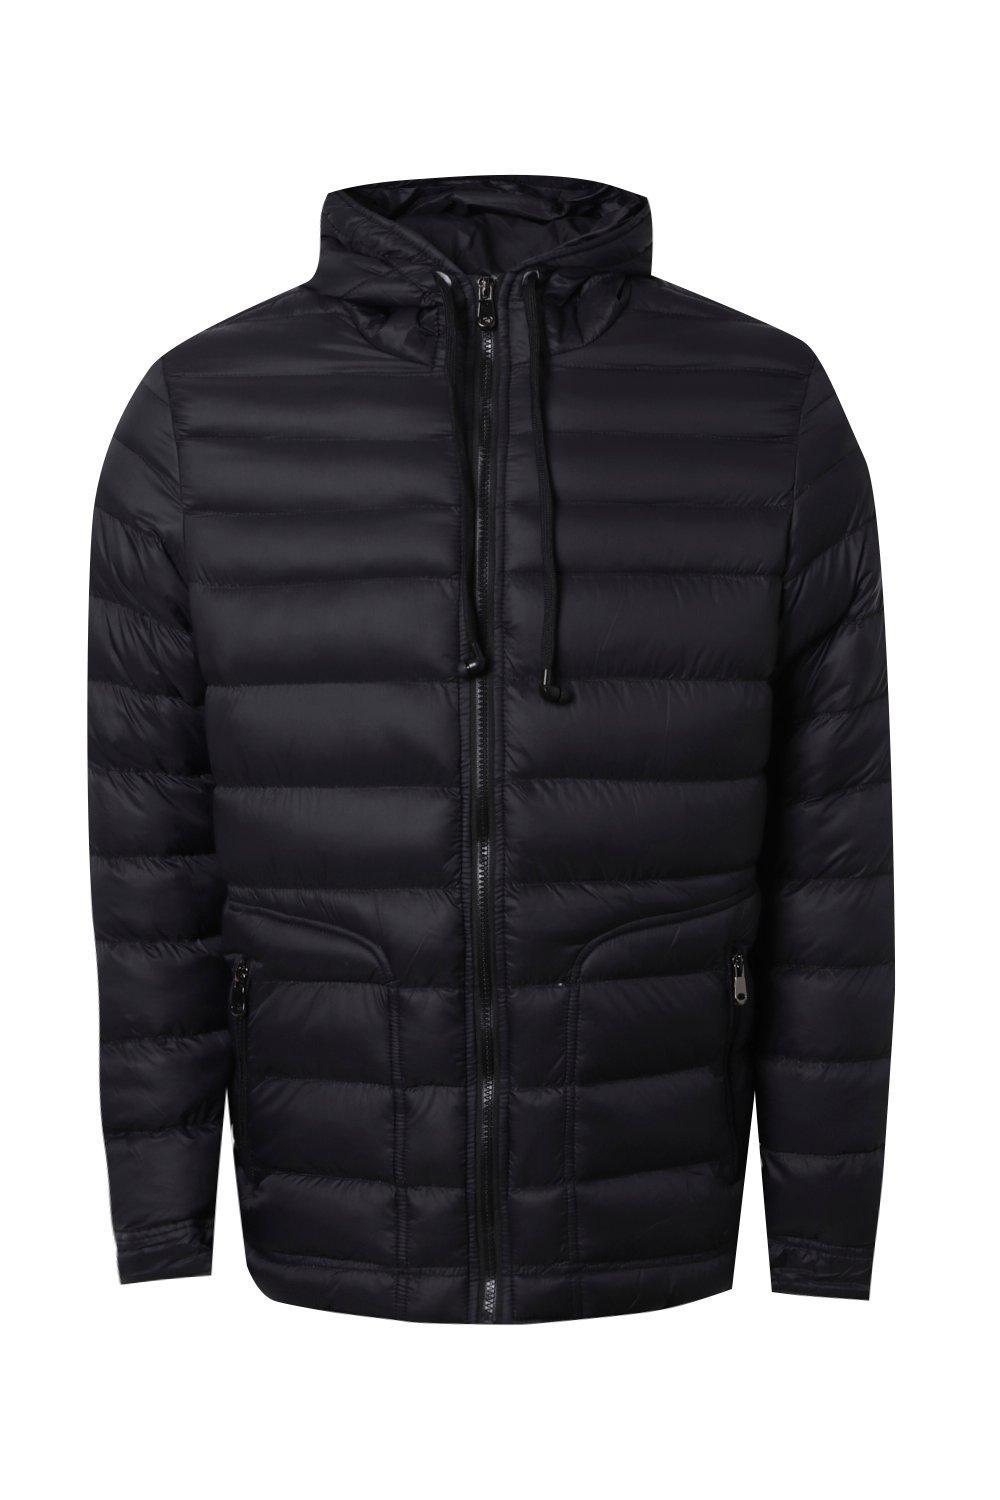 moncler jacket with headphones